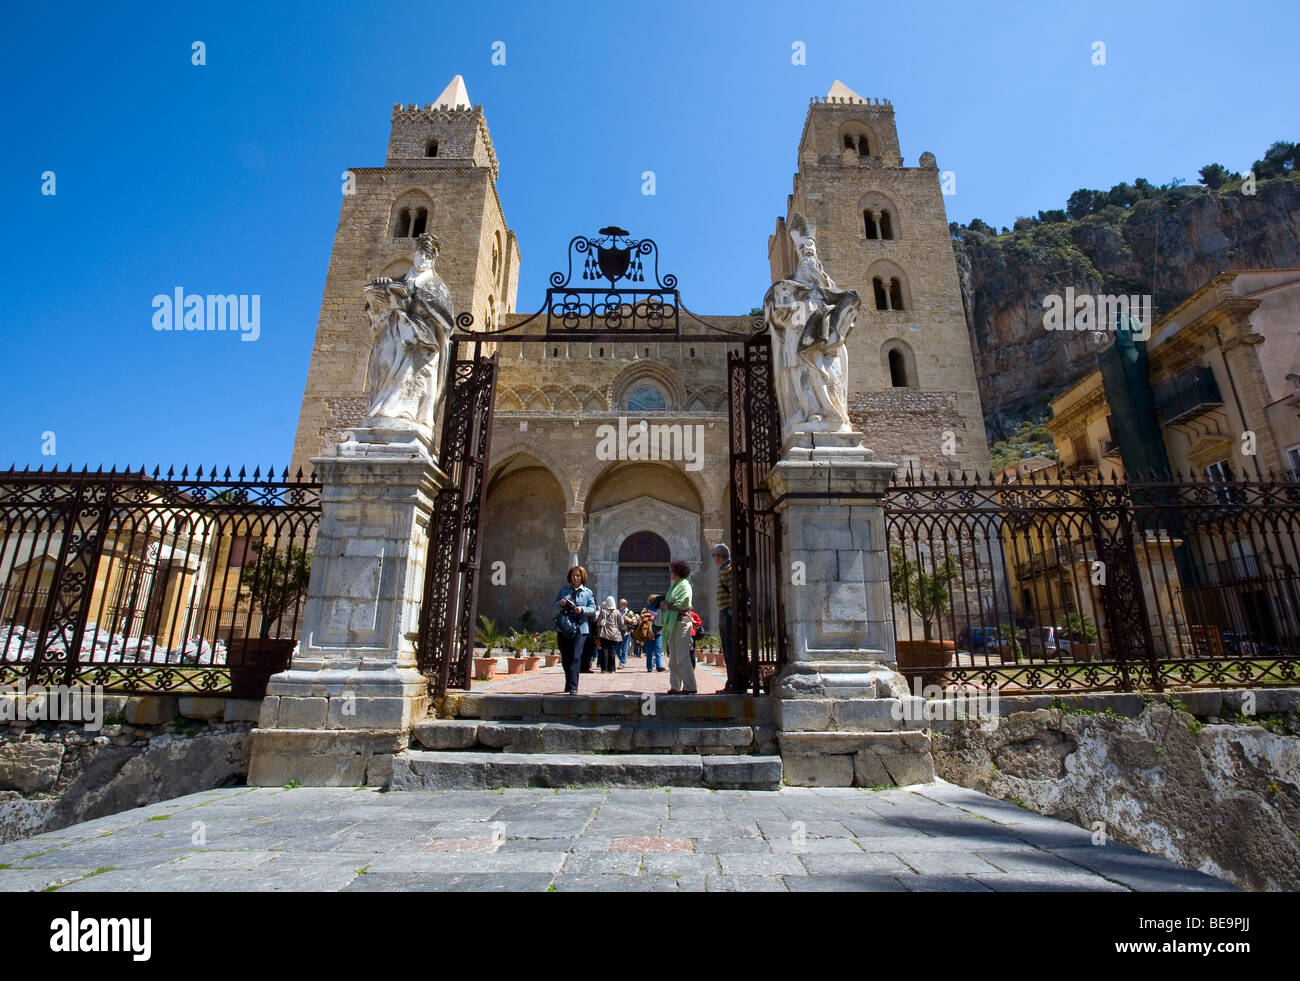 Entrance to the Duomo (Cathedral) in the town of Cefalu on the Island of Sicily, Italy Stock Photo